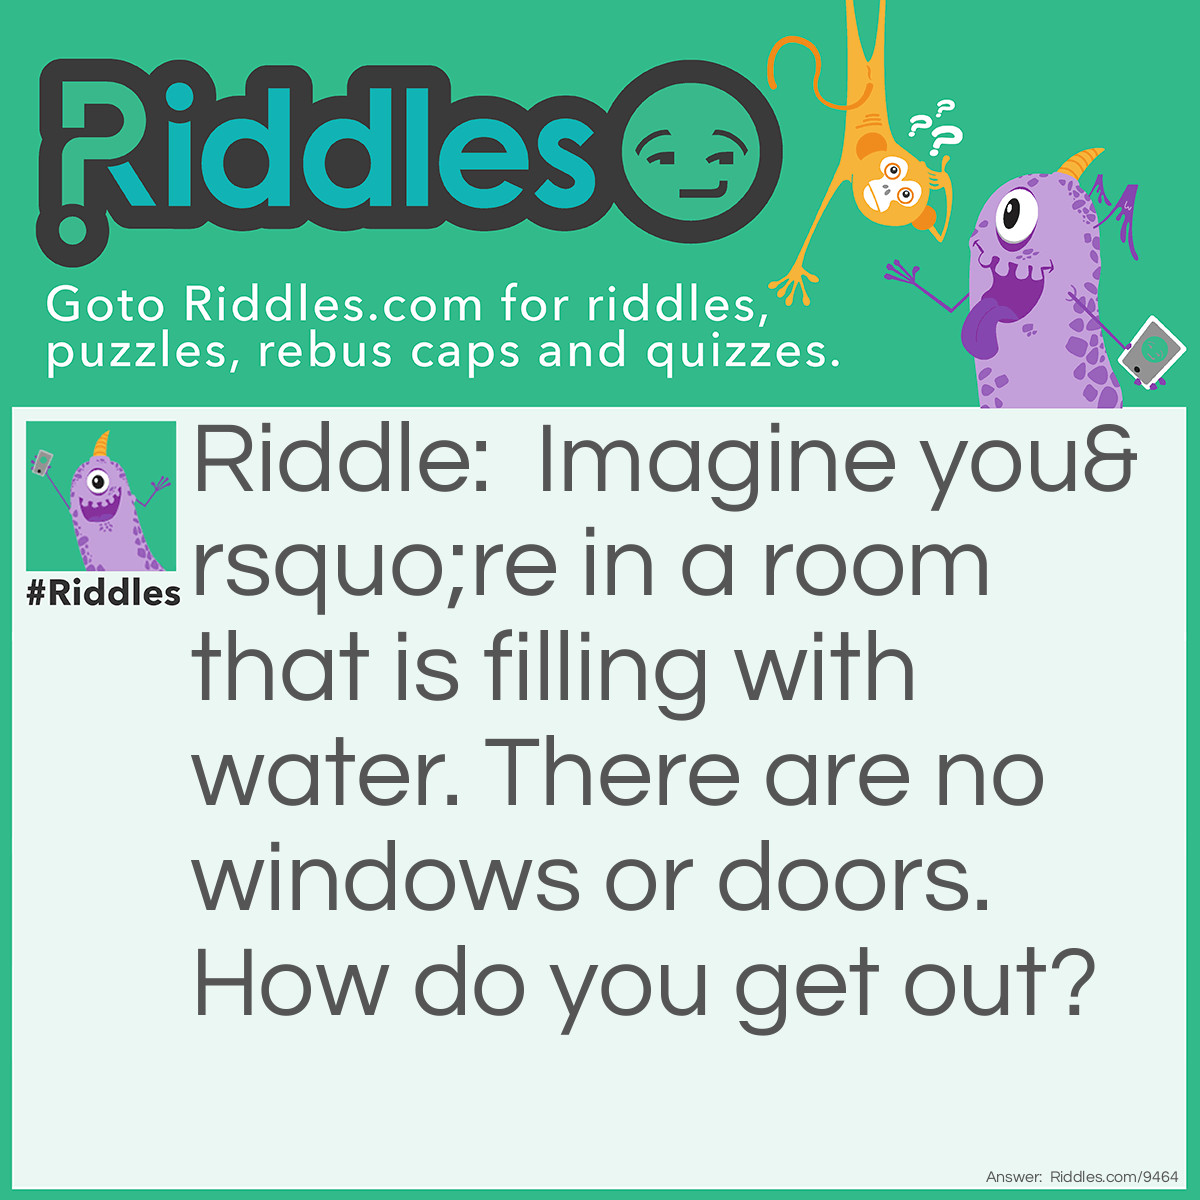 Riddle: Imagine you're in a room that is filling with water. There are no windows or doors. How do you get out? Answer: Stop imagining!